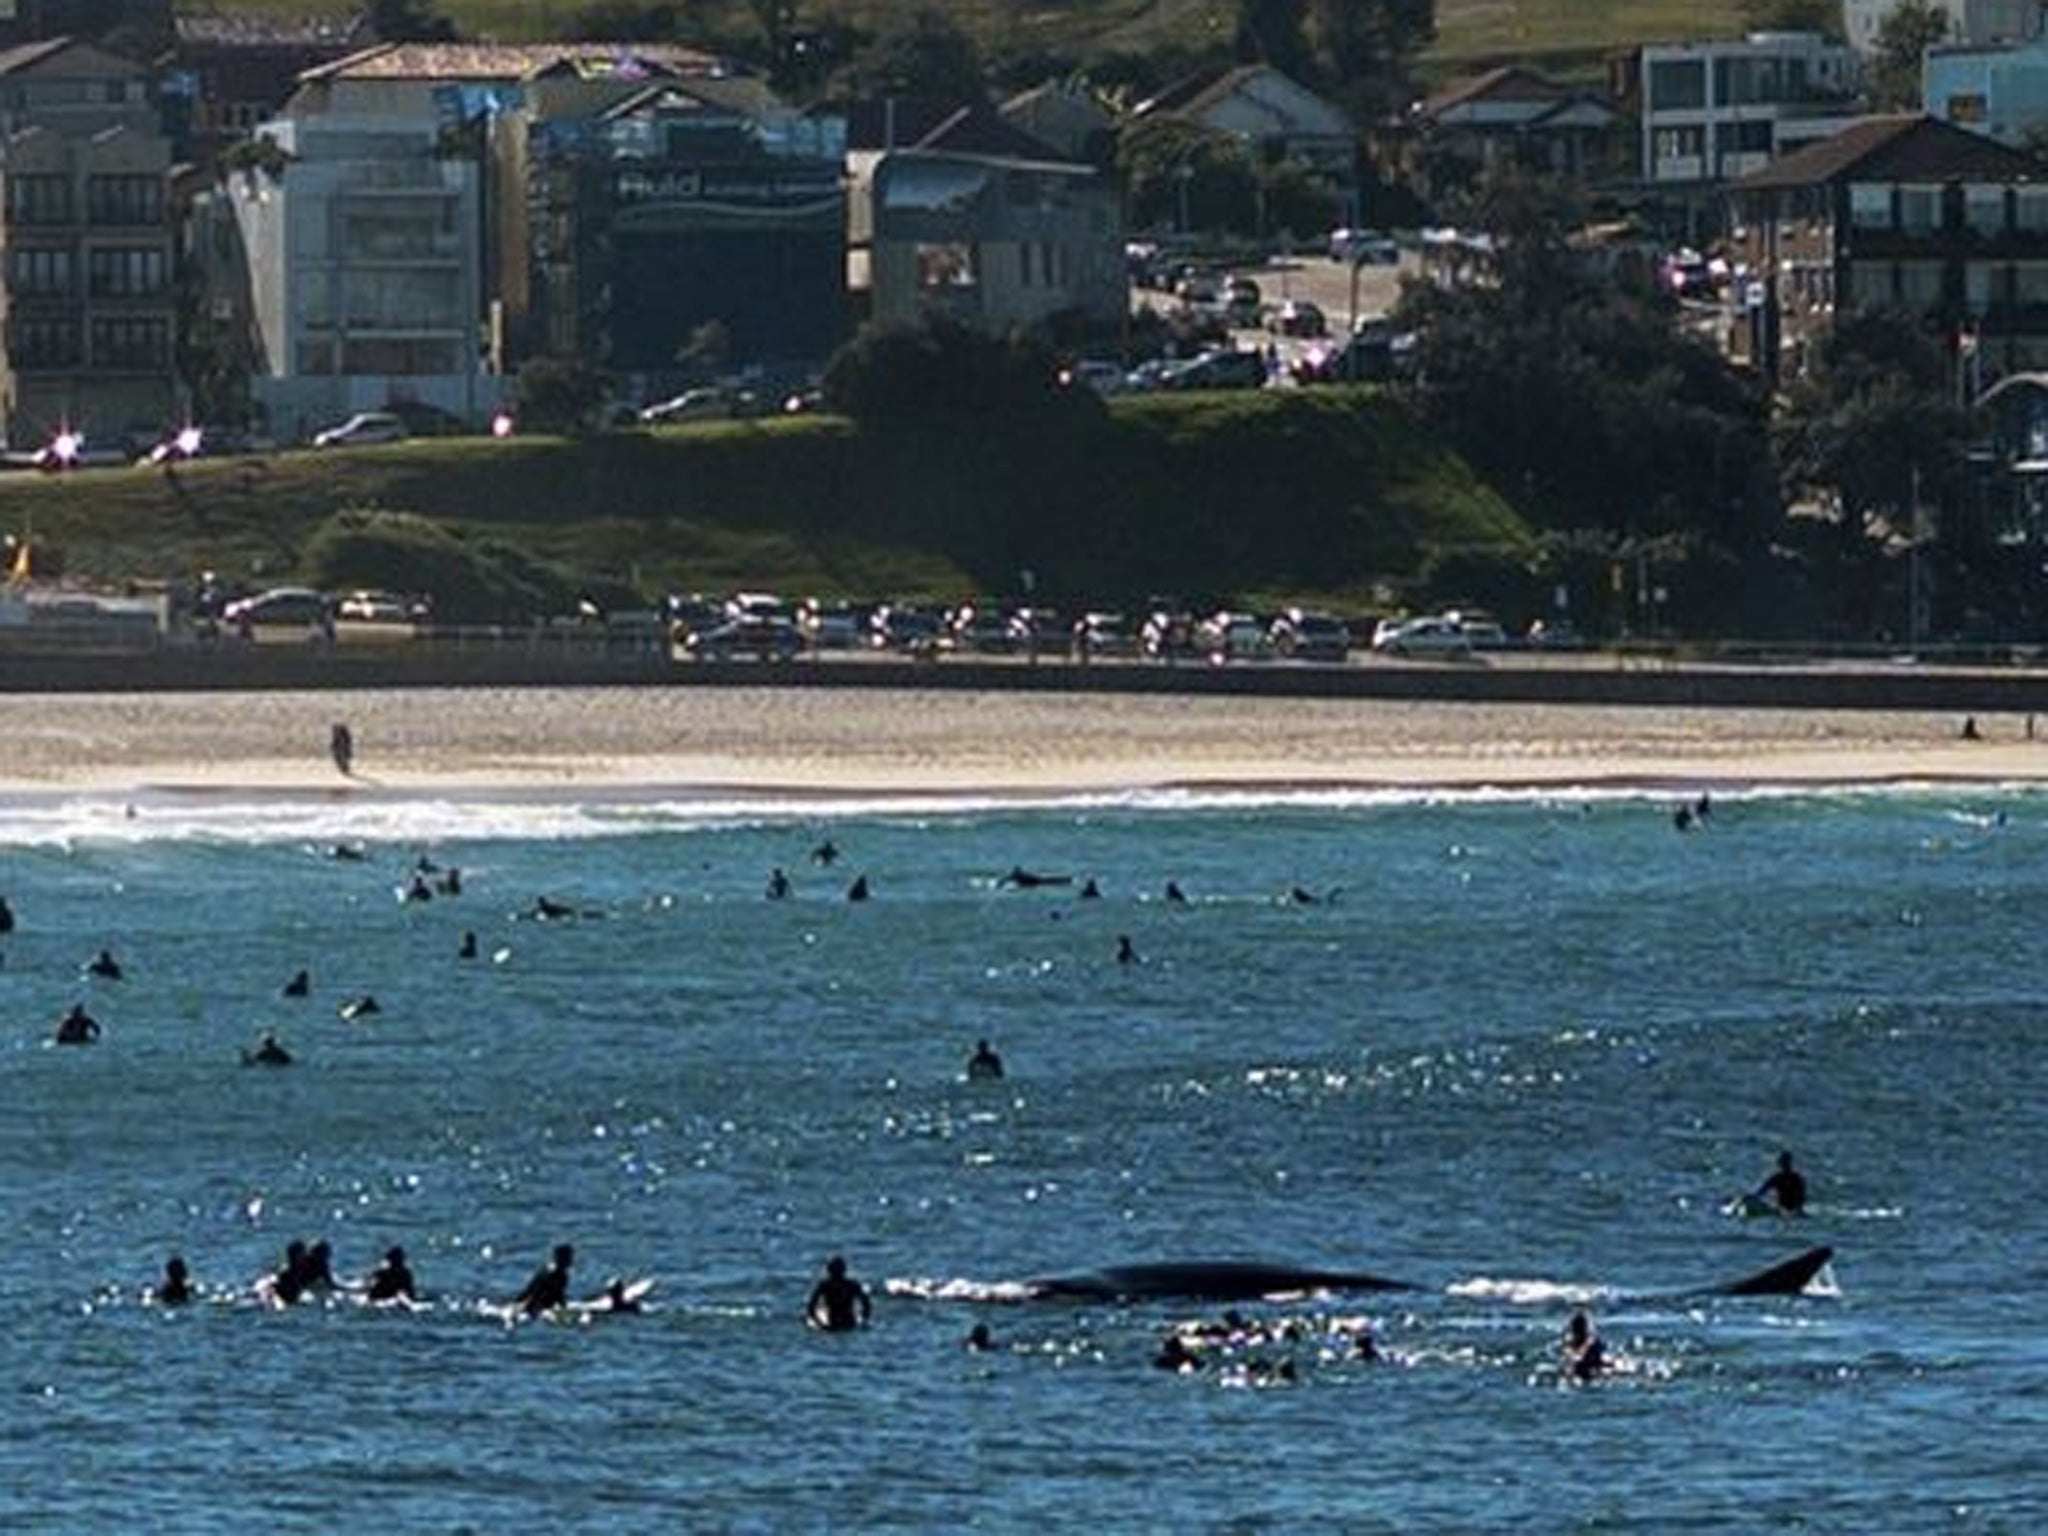 Surfers look at a whale while waiting for waves at Bondi beach in Sydney. A surfer was taken to local St Vincent's Hospital after being knocked unconscious by the giant's tail flick